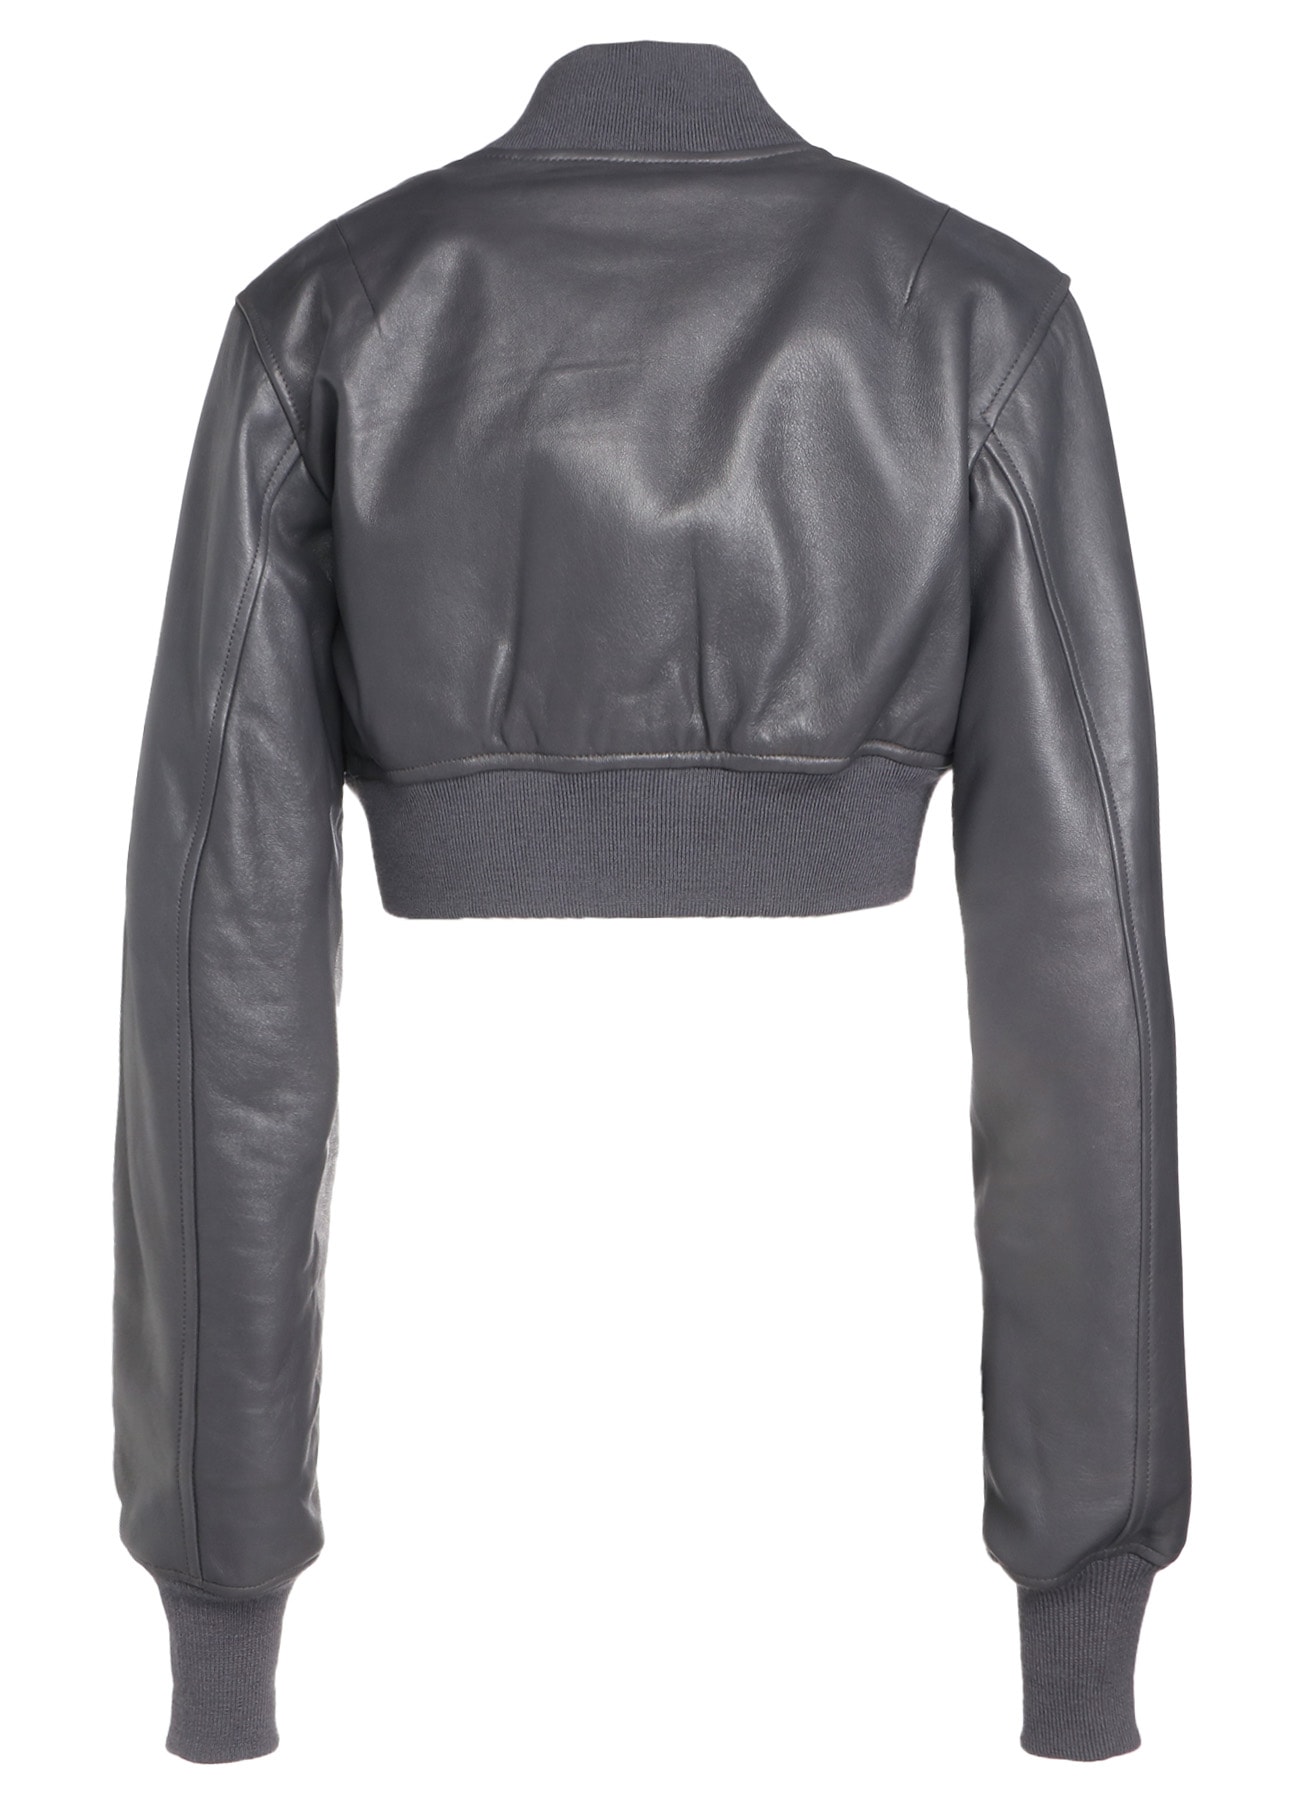 SEMI-VEGETABLE TANNED SHEEP LEATHER CROPPED BOMBER JACKET(S Gray 